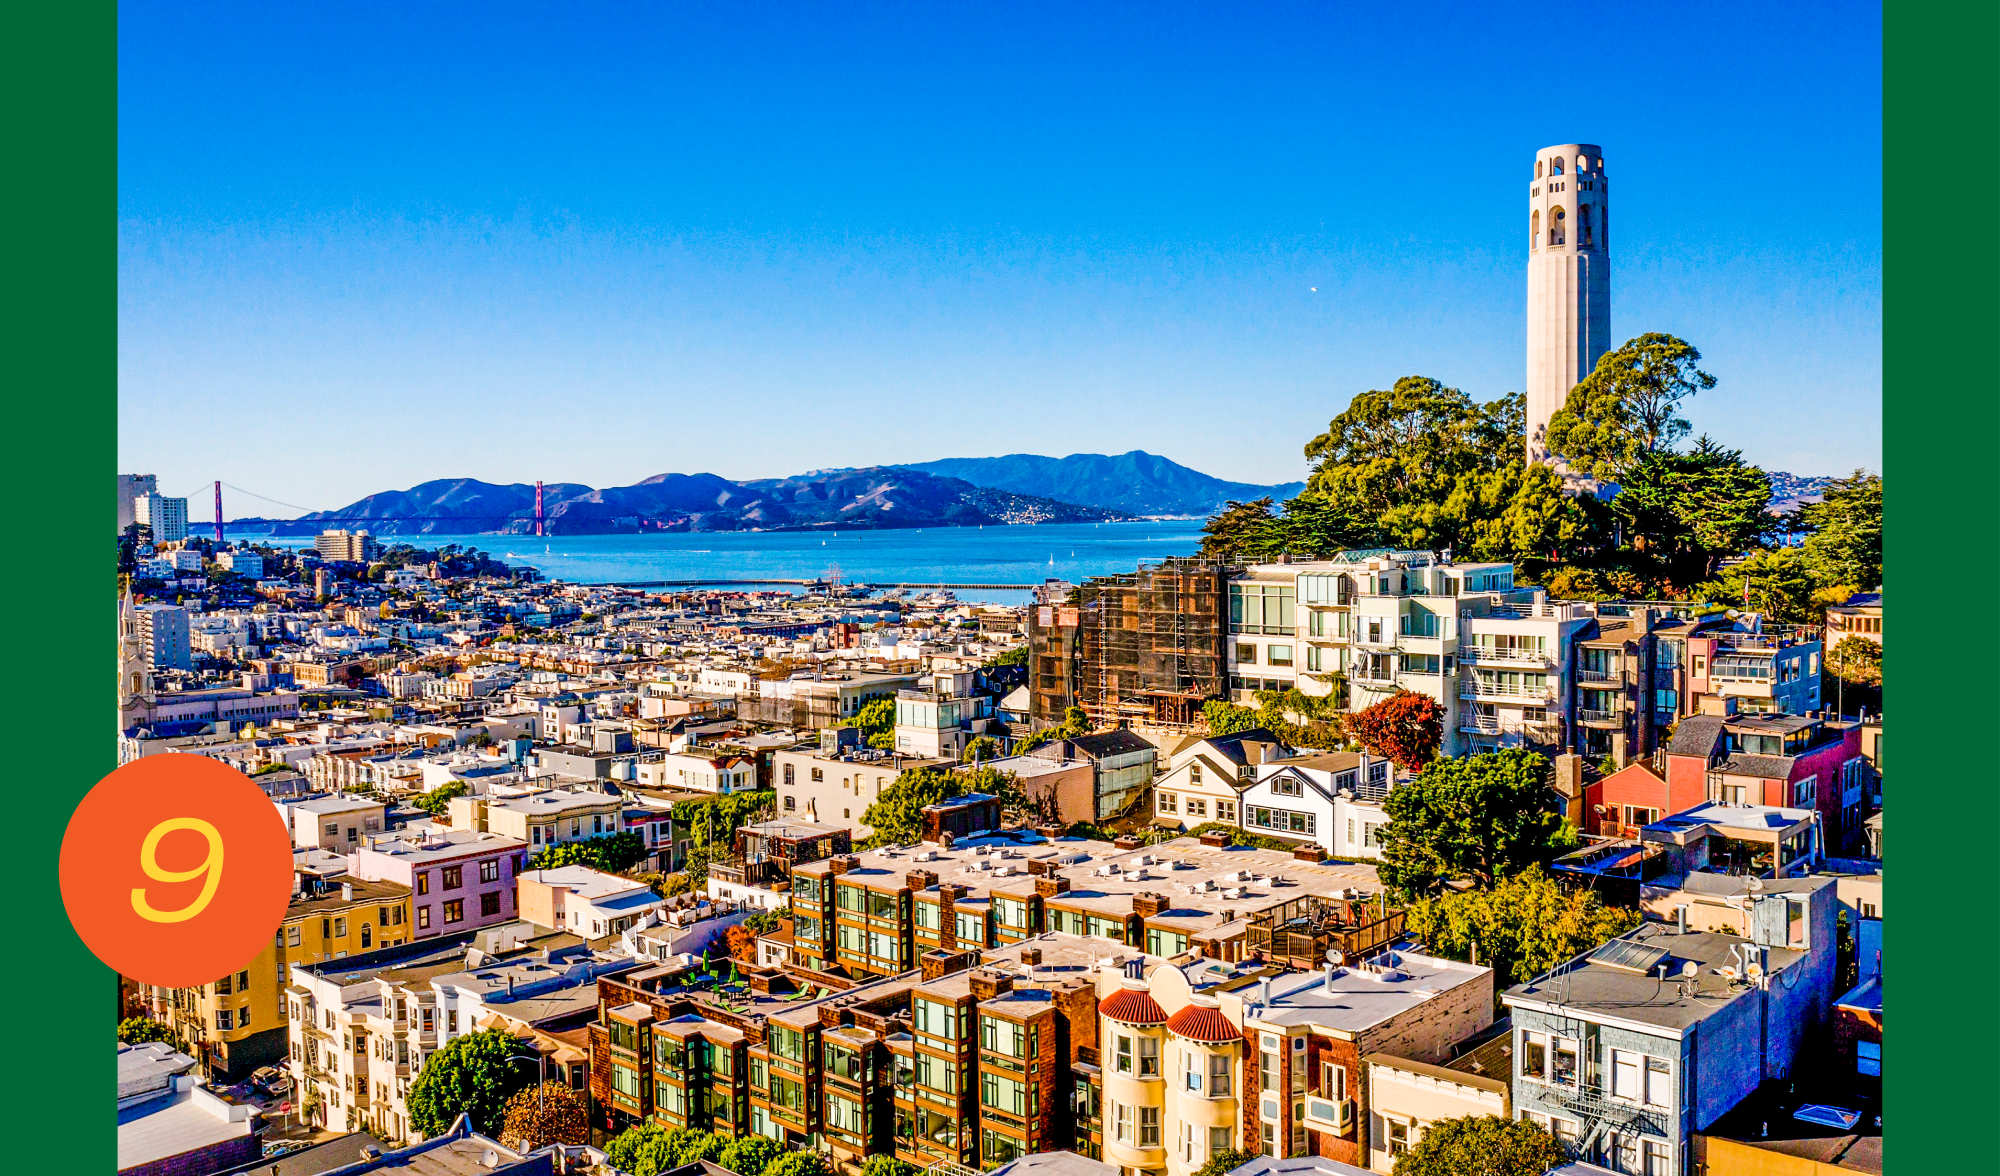 Coit Tower, high on the hill, overlooks the North Beach District of San Francisco, with the bay in the distance